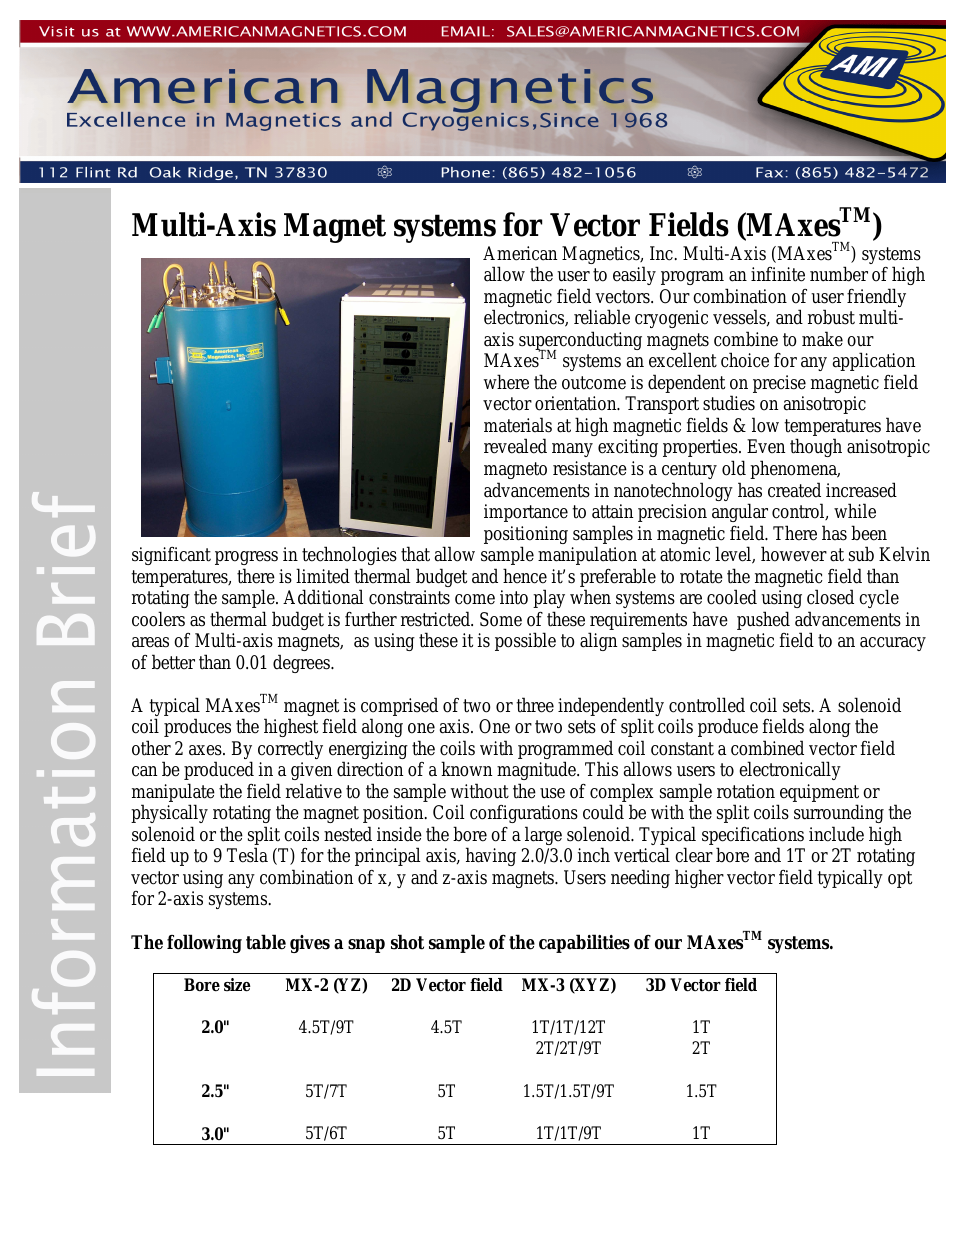 MAxes Multi-Axis Magnet systems for Vector Fields